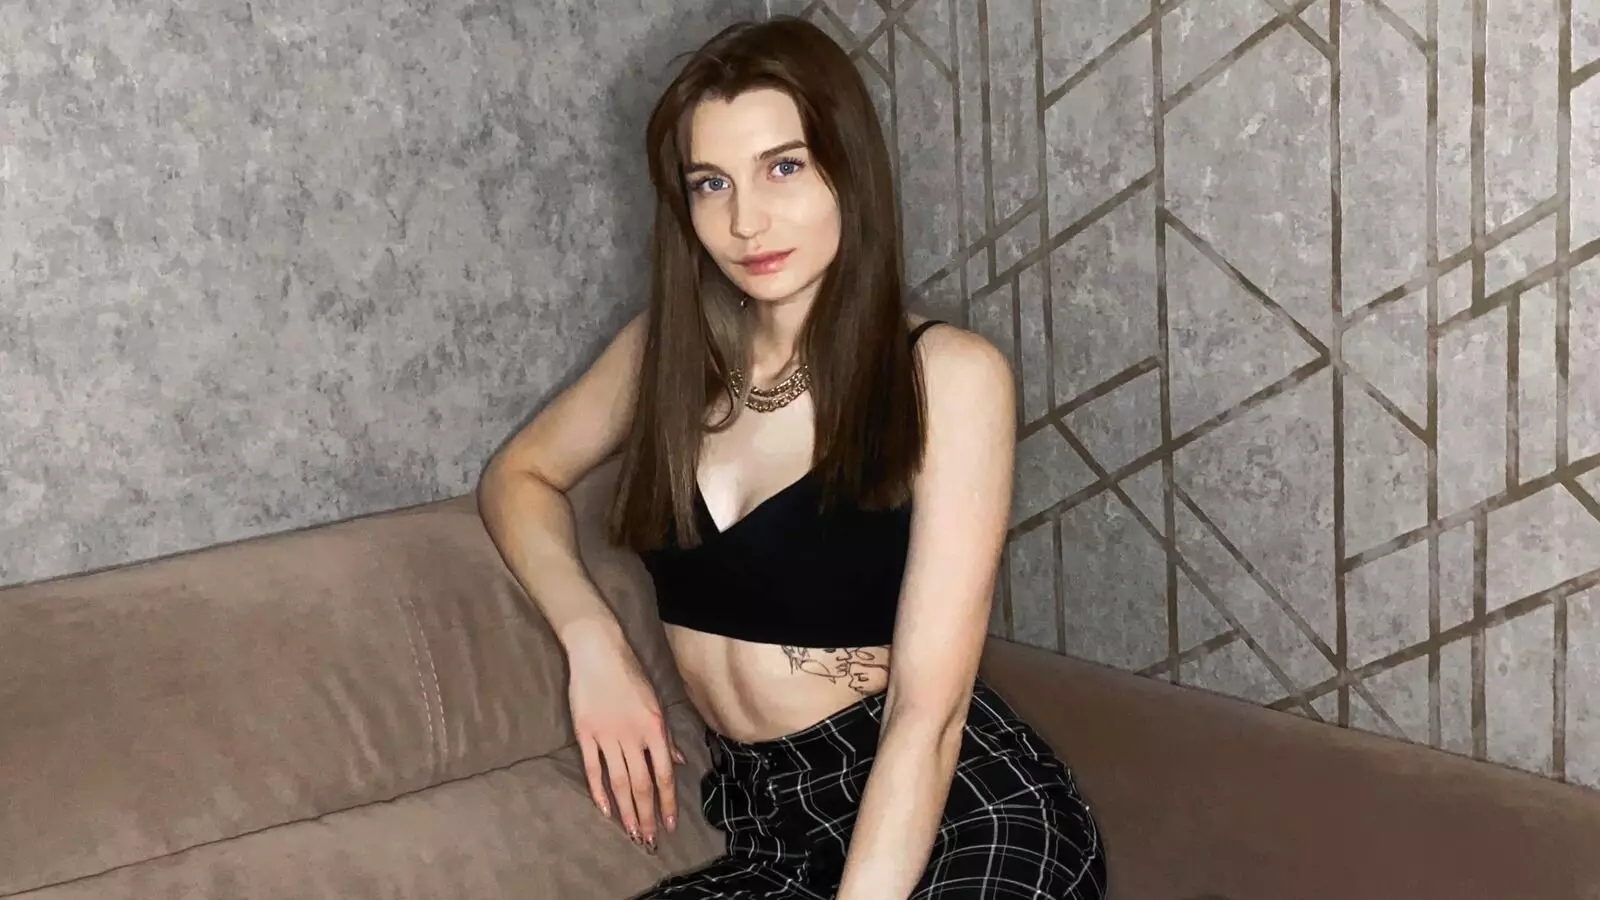 LilyGrayson's chat room is %status%